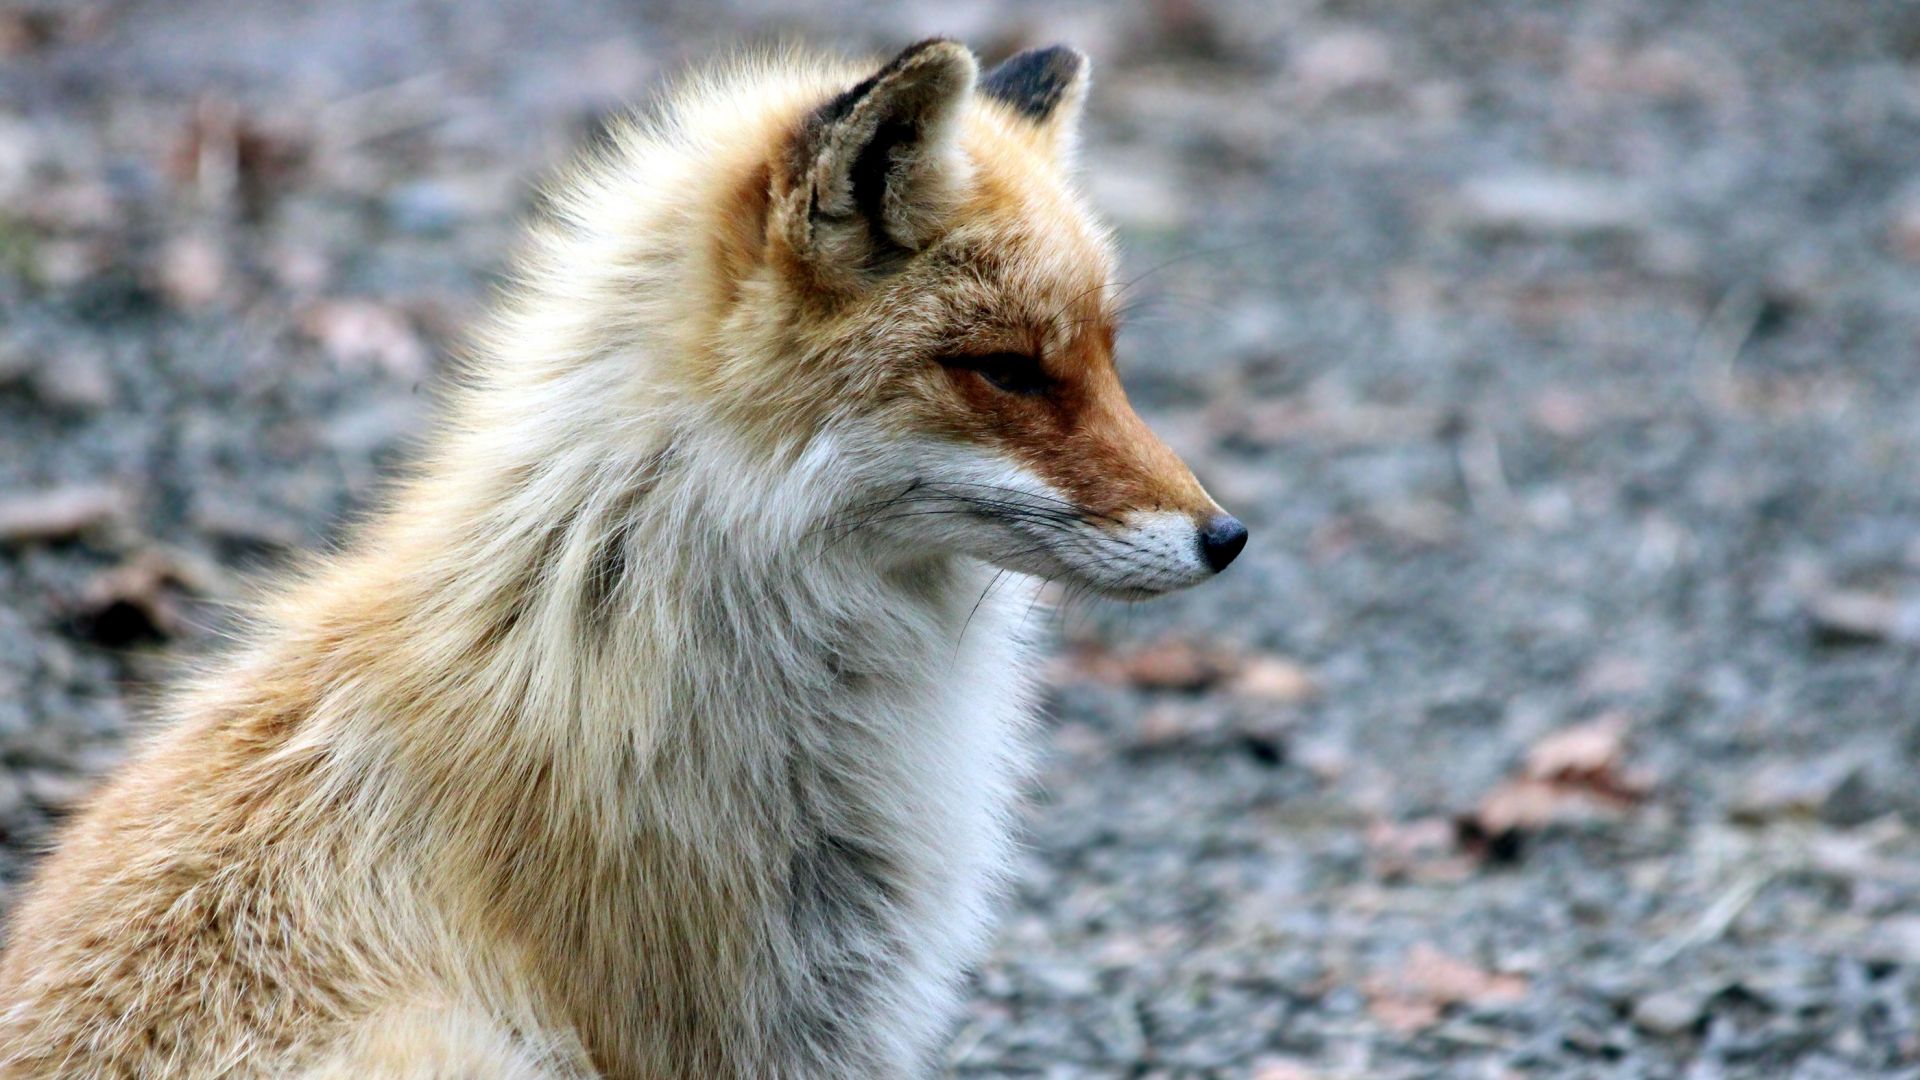 Desktop Wallpaper Furry, Red Fox, Cunning Animal, Hd Image, Picture,  Background, Lhbds7